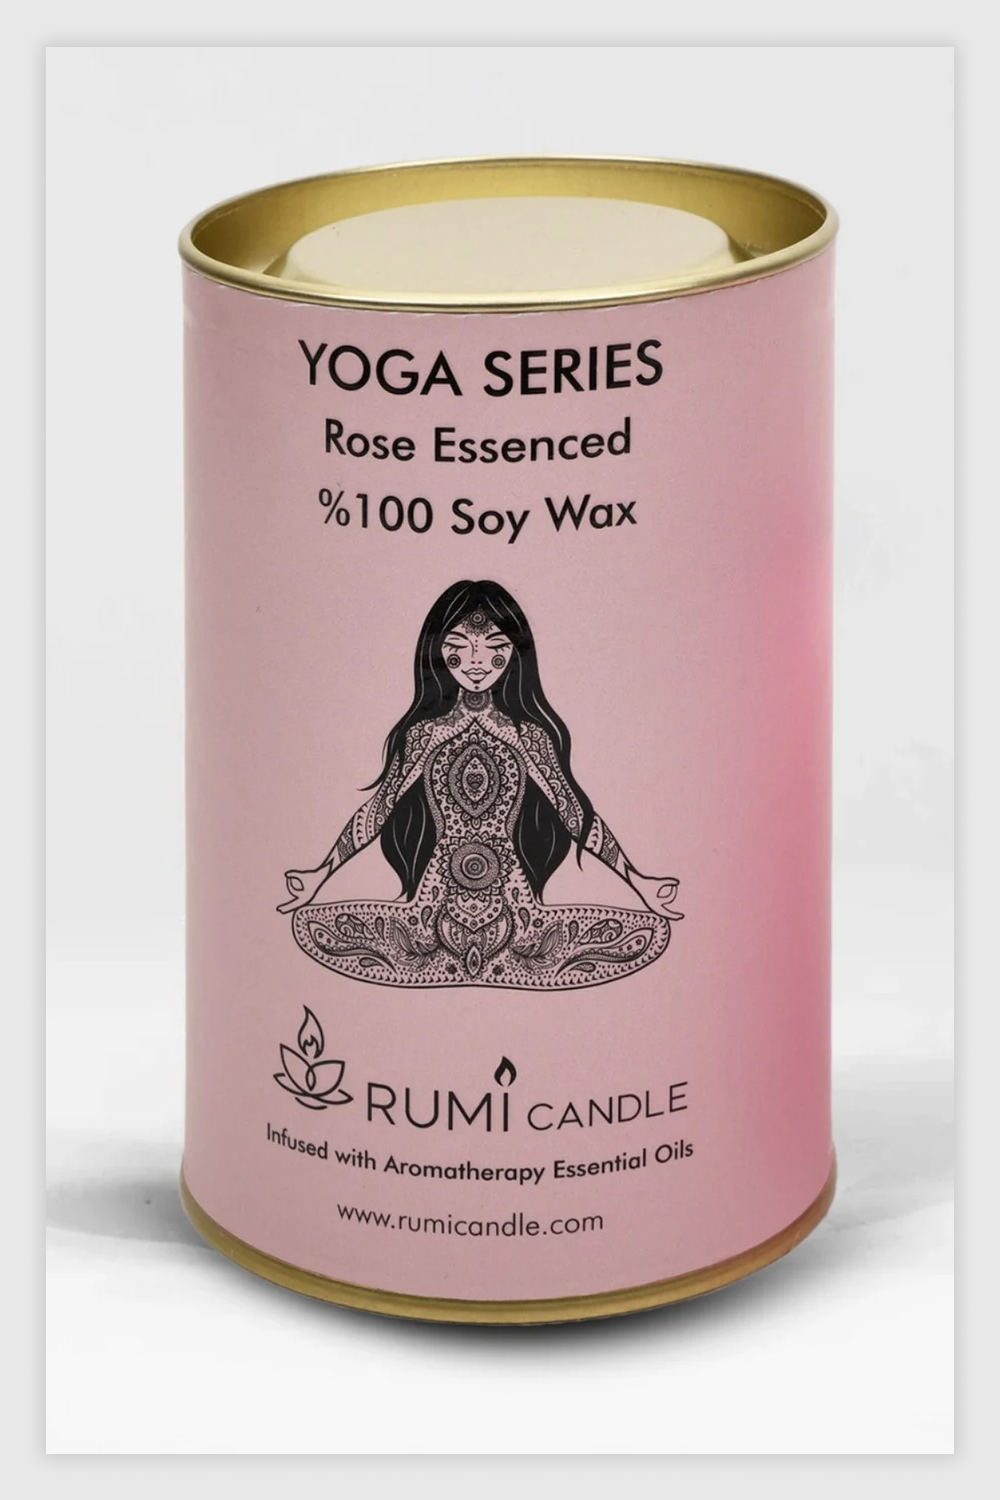 Stylish candle with woman in yoga pose printed on it.